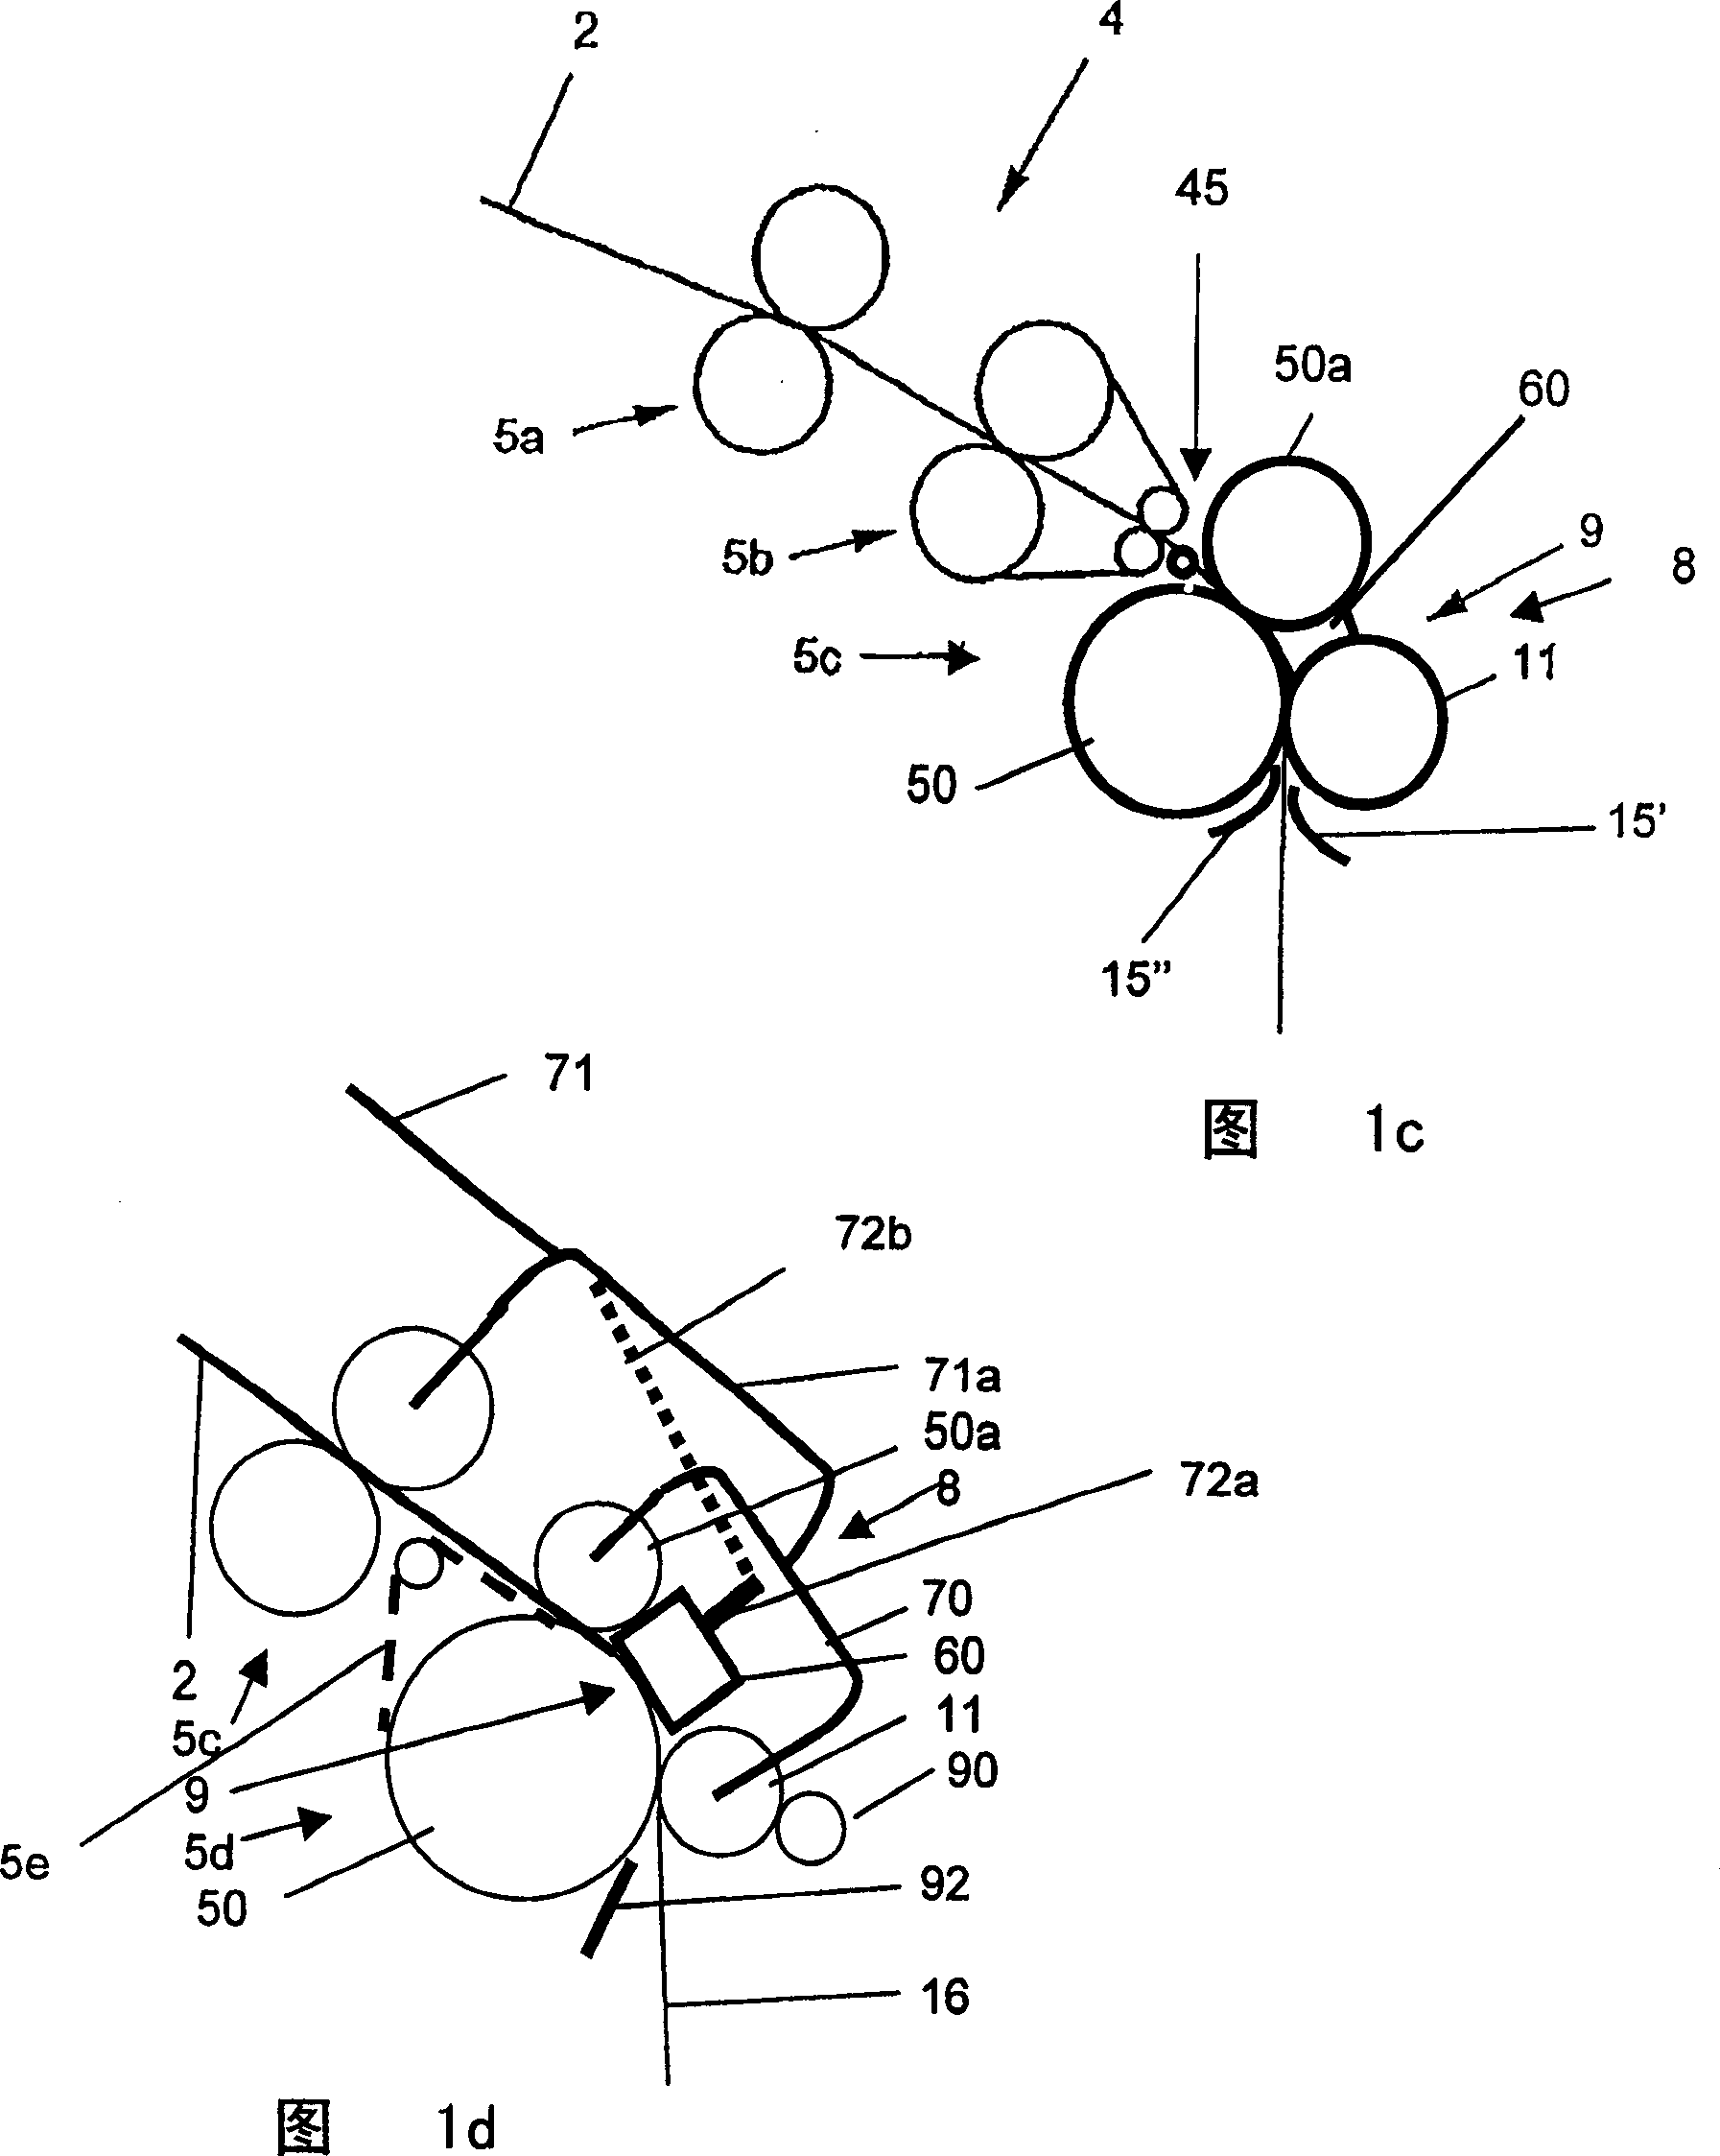 Spinning machine with compressing apparatus